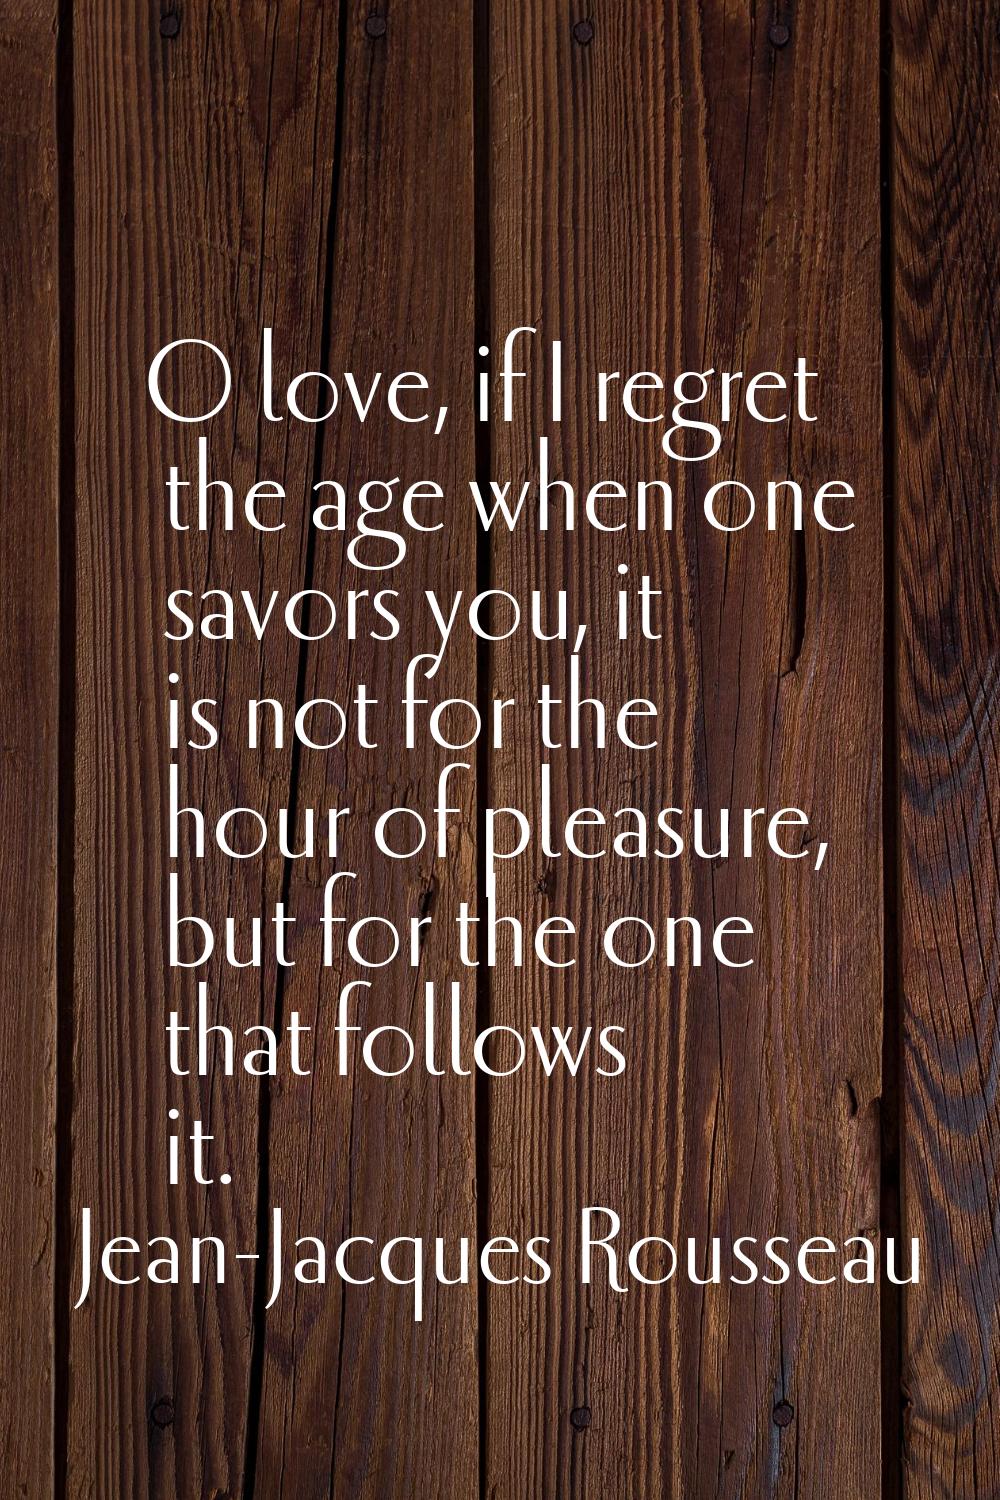 O love, if I regret the age when one savors you, it is not for the hour of pleasure, but for the on